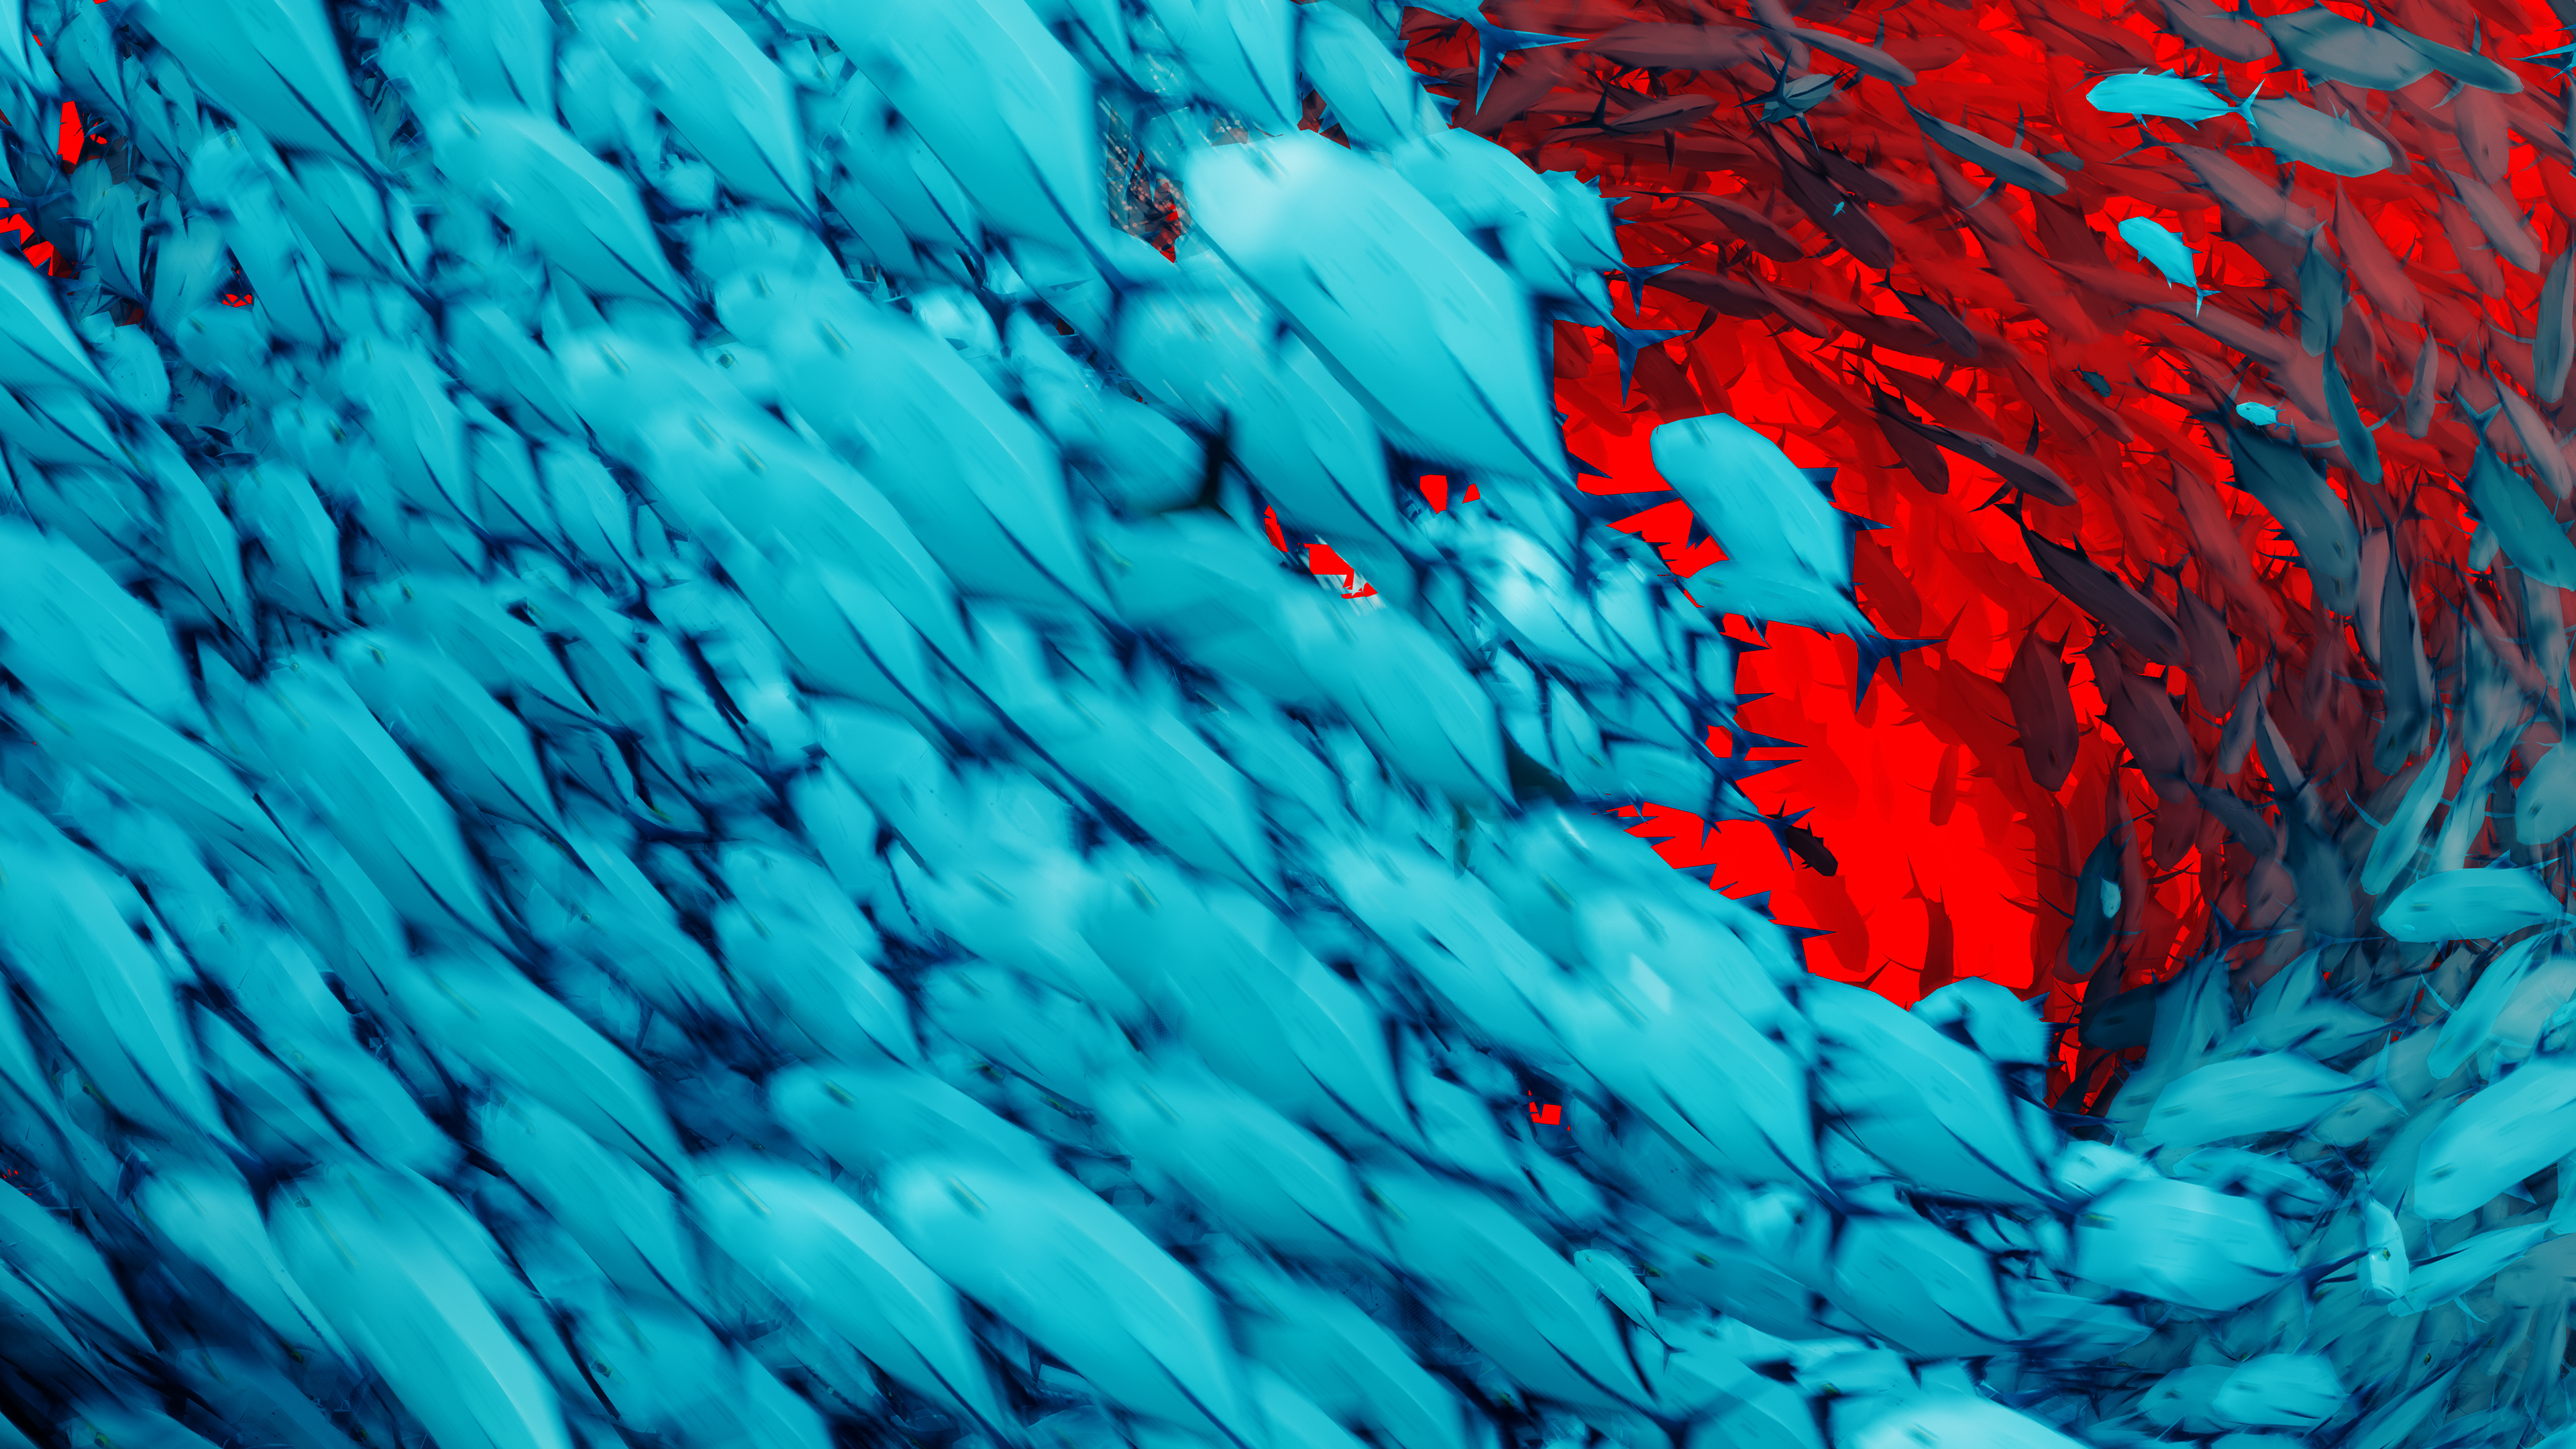 blue red texture abstract 4k 1553075334 - Blue Red Texture Abstract 4k - texture wallpapers, hd-wallpapers, digital art wallpapers, abstract wallpapers, 5k wallpapers, 4k-wallpapers